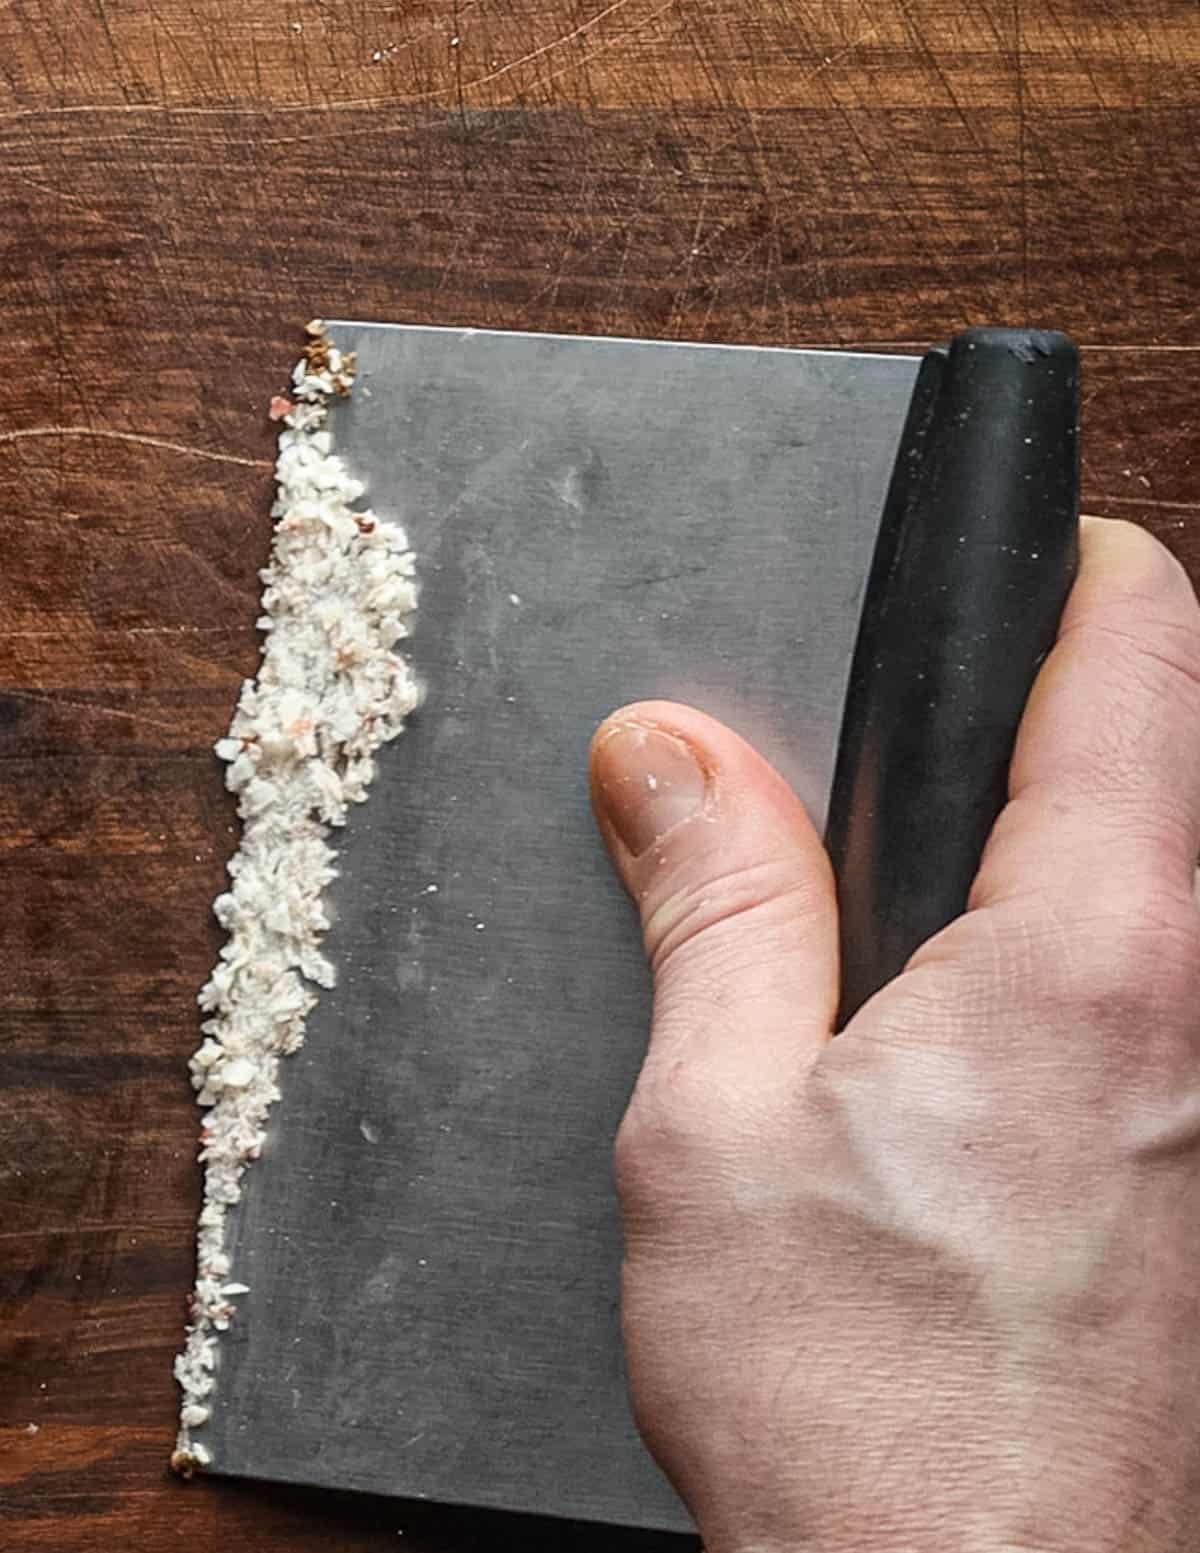 Cleaning beef fat from a cutting board using a bench scraper.